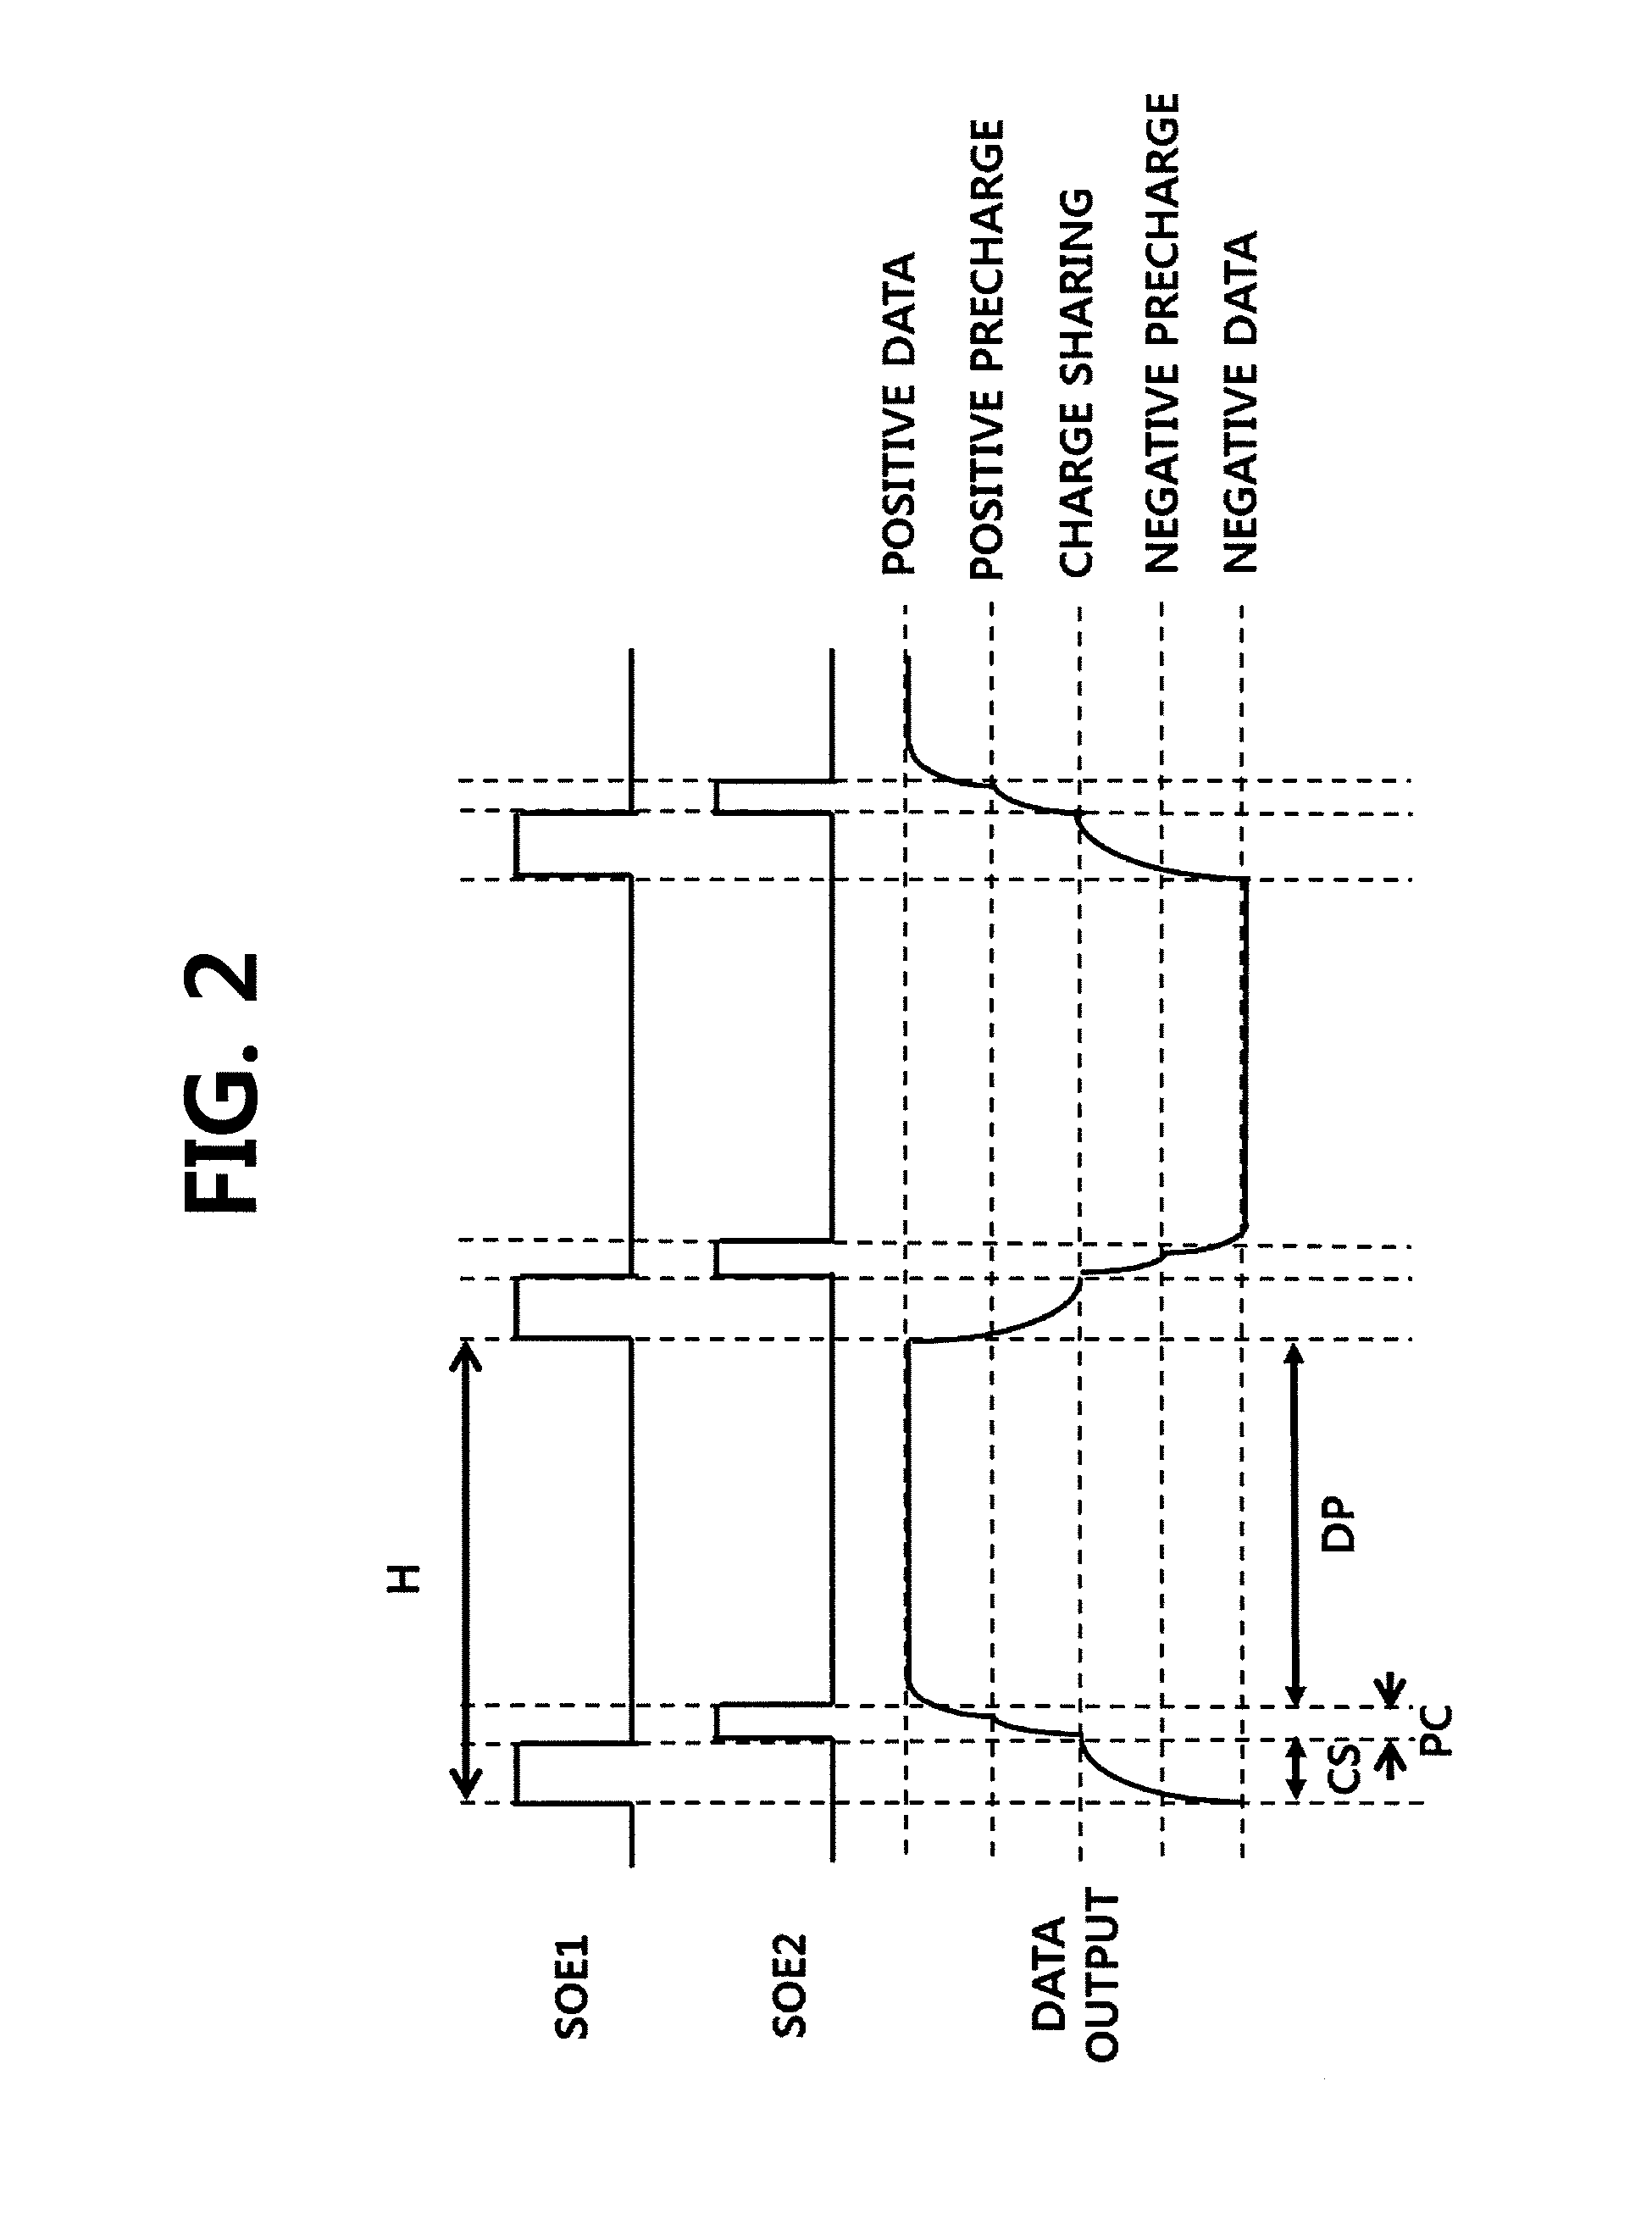 Data driving apparatus for liquid crystal display device